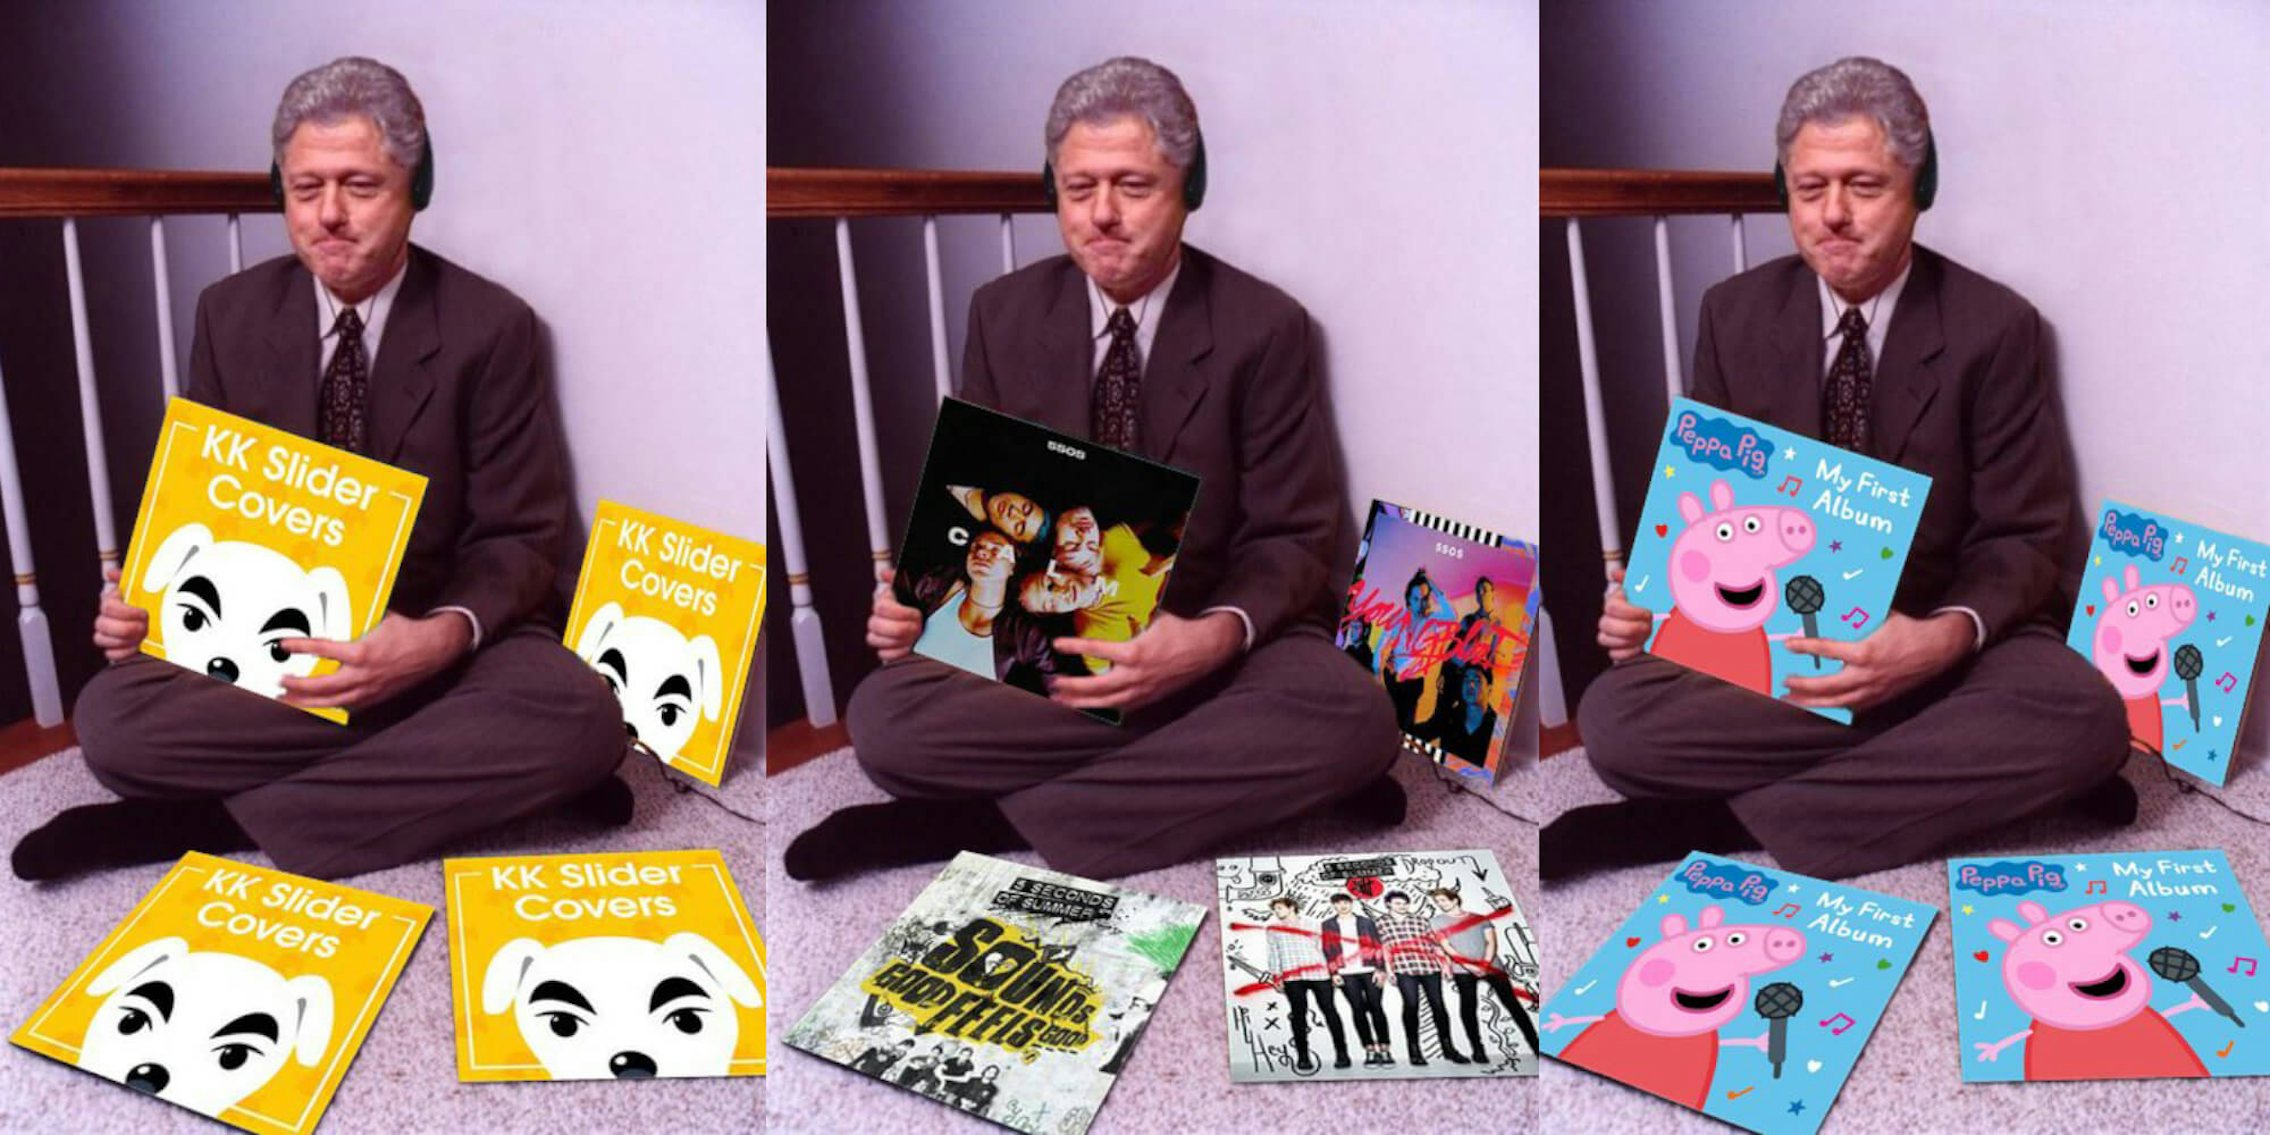 Pictures of Bill Clinton holding different album covers